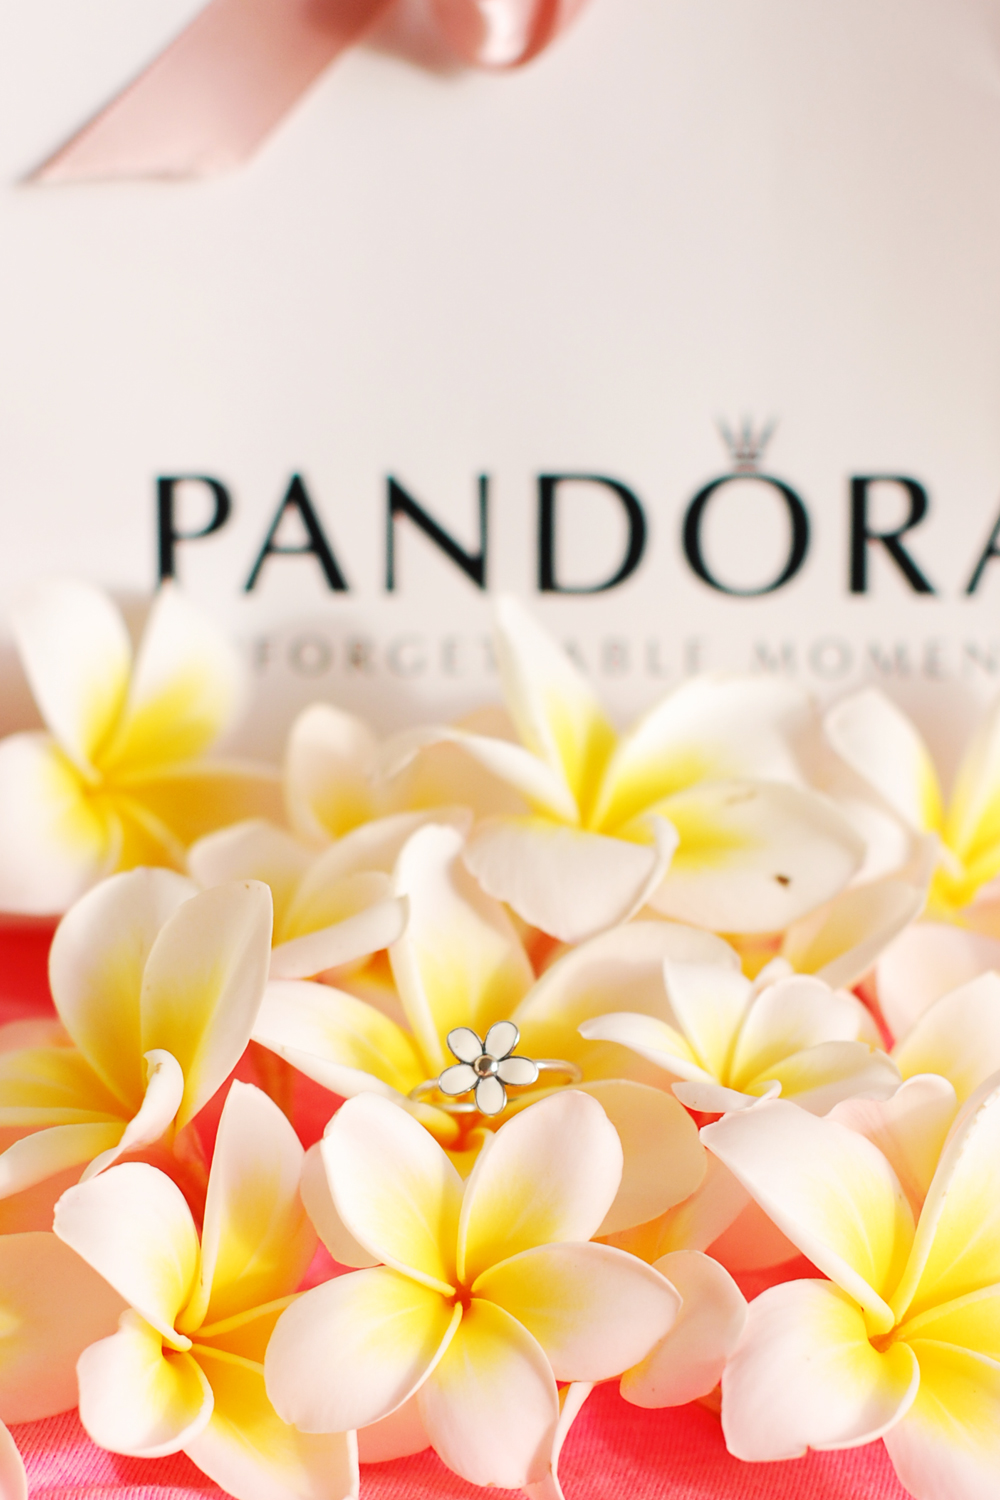 pandora madelief frangipani ring Kuala Lumpur travel reizen memory's herinnering unforgettable moments fashion mode wit lifestyle by linda